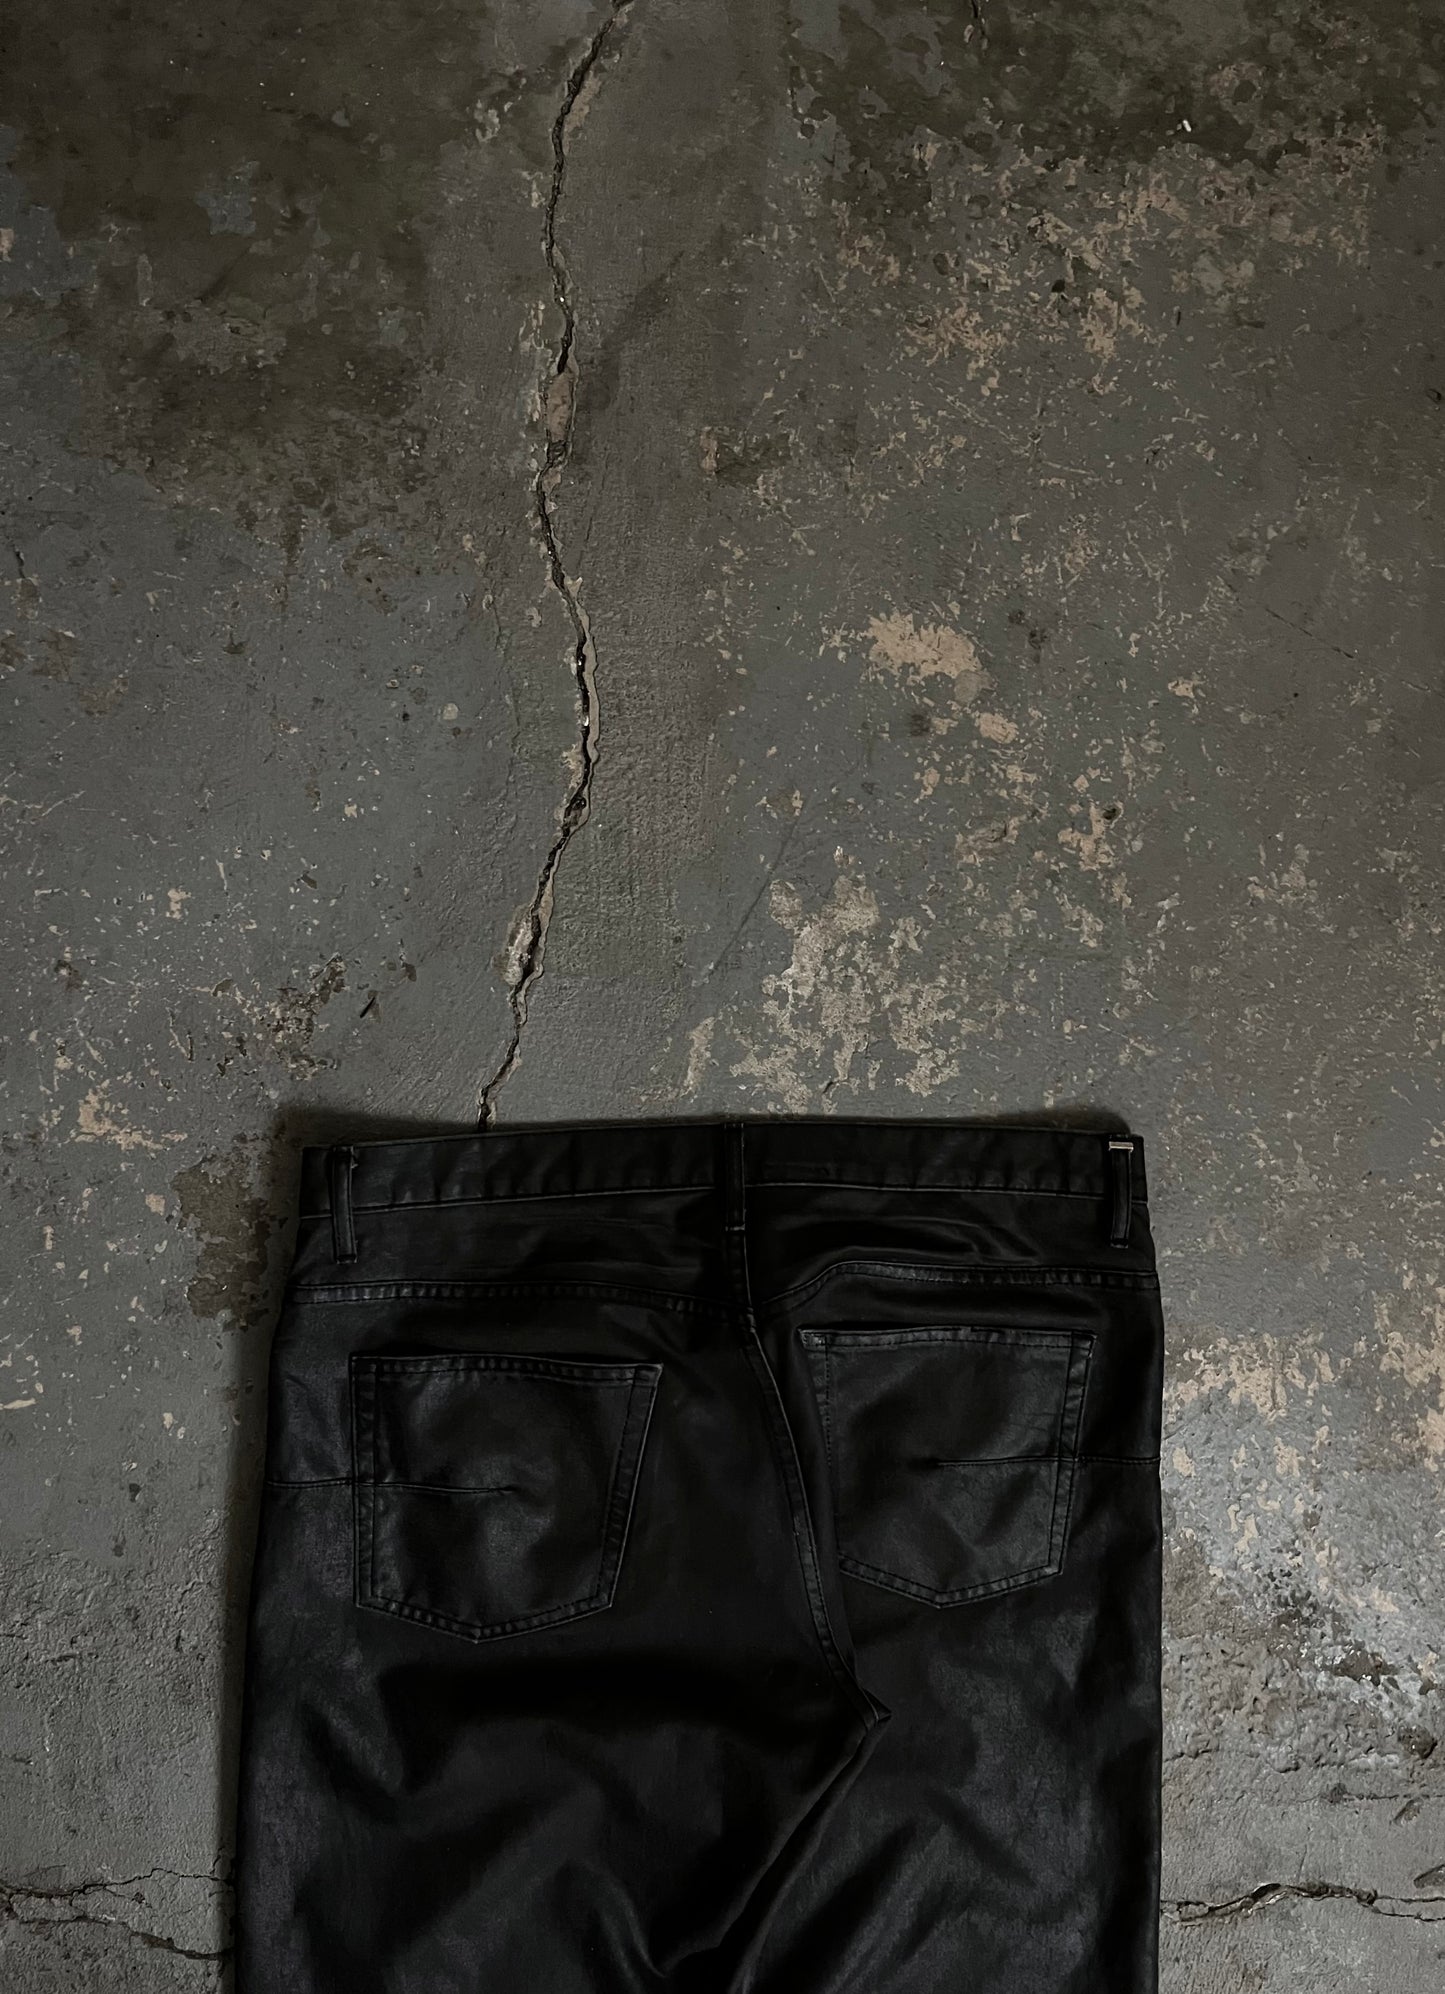 Dior AW03 “Luster” Waxed Pants